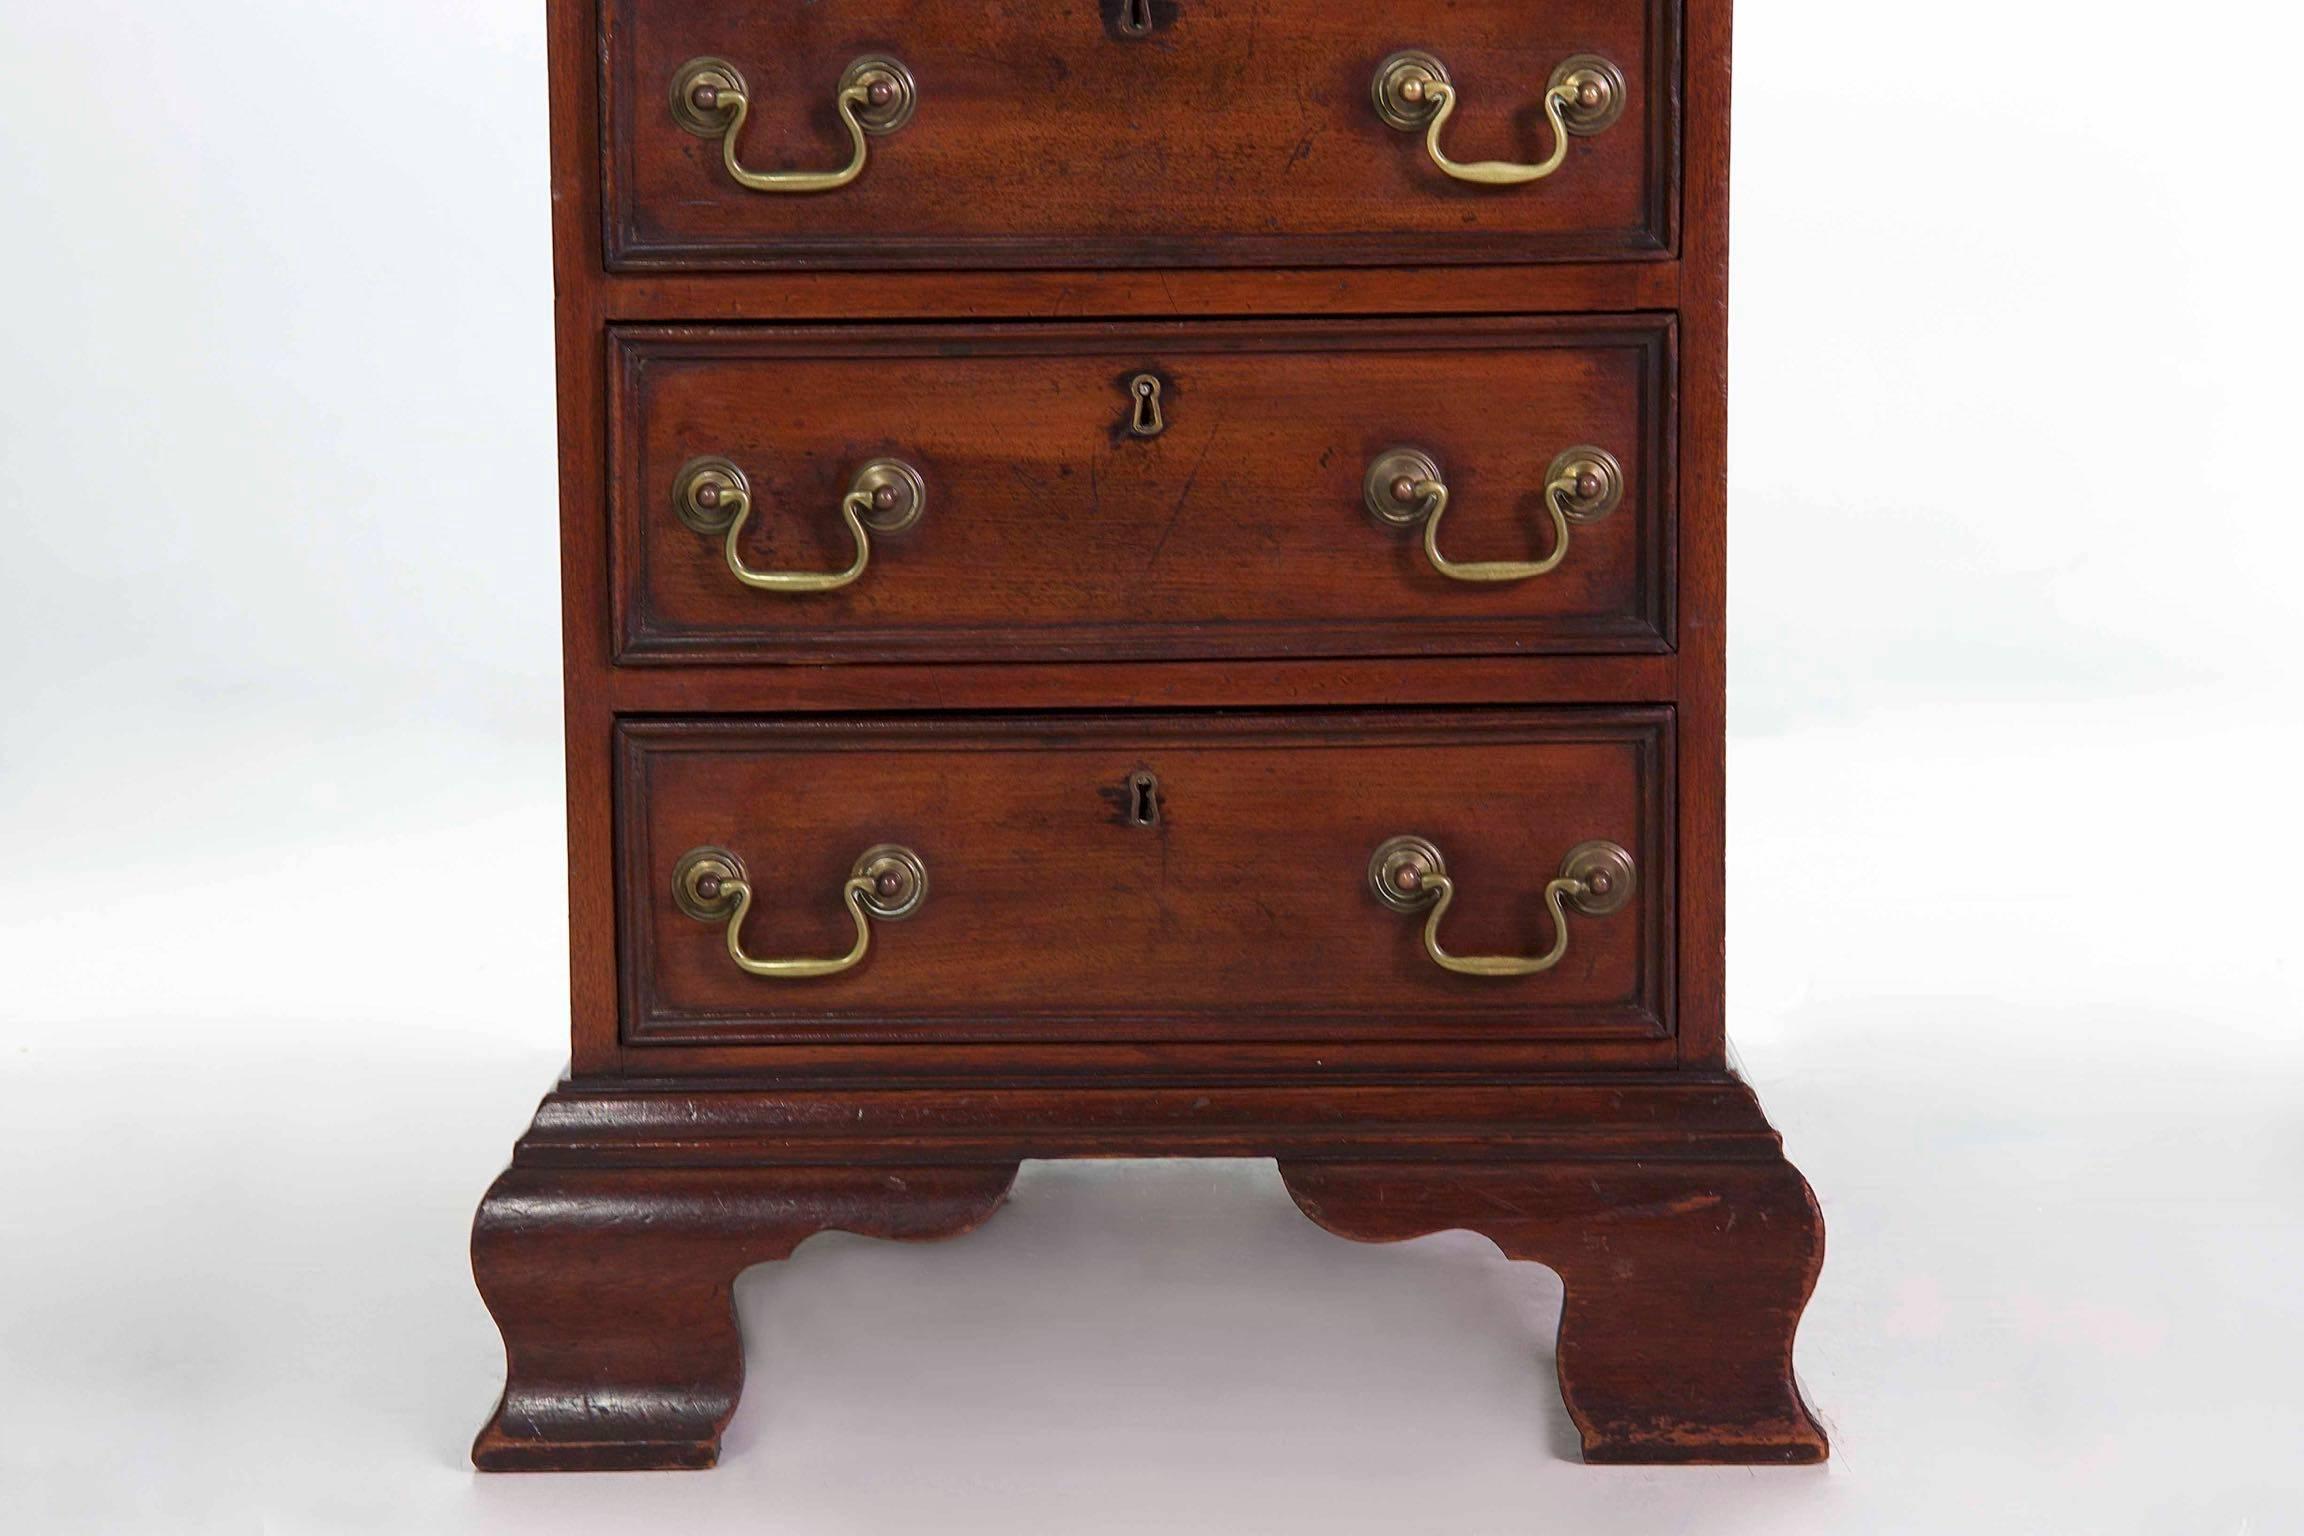 20th Century English George III Style Mahogany and Leather Antique Pedestal Desk im Zustand „Gut“ in Shippensburg, PA